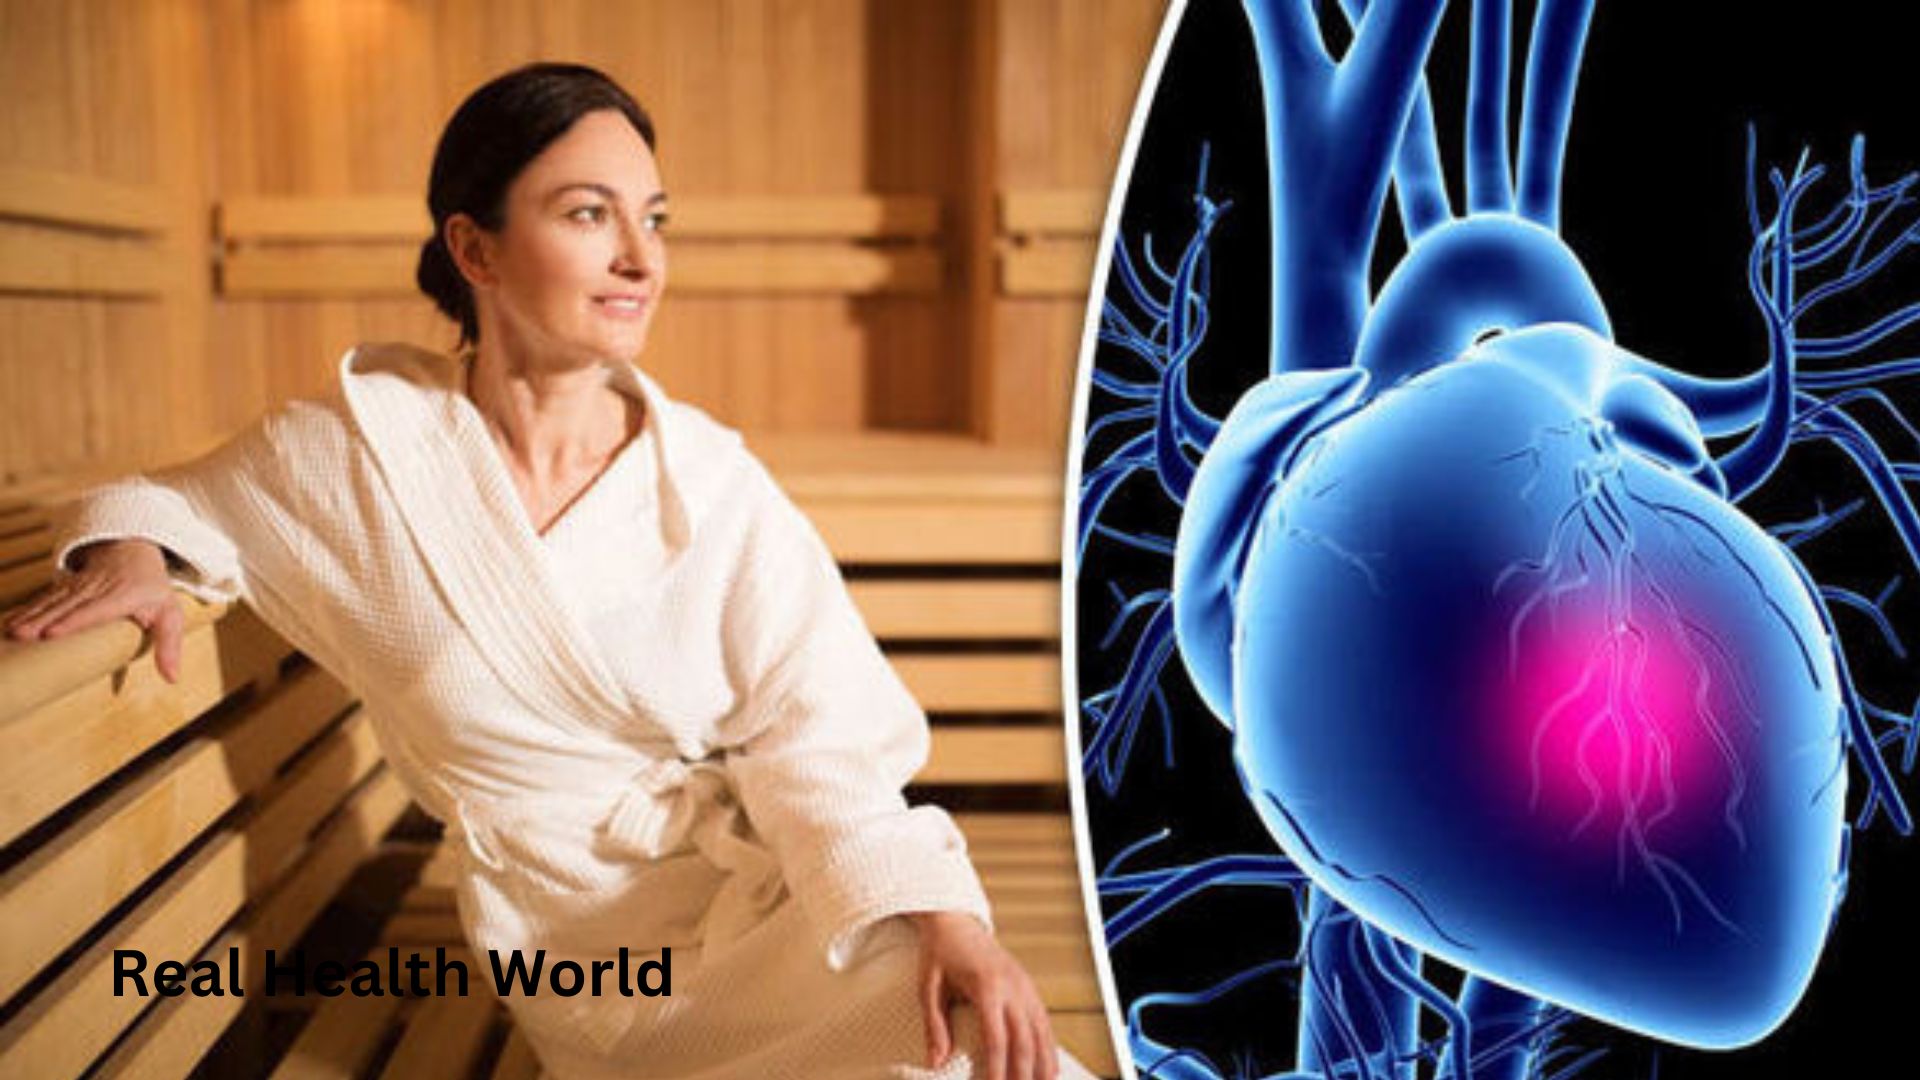 Sauna exercise is effective in reducing the risk of heart disease